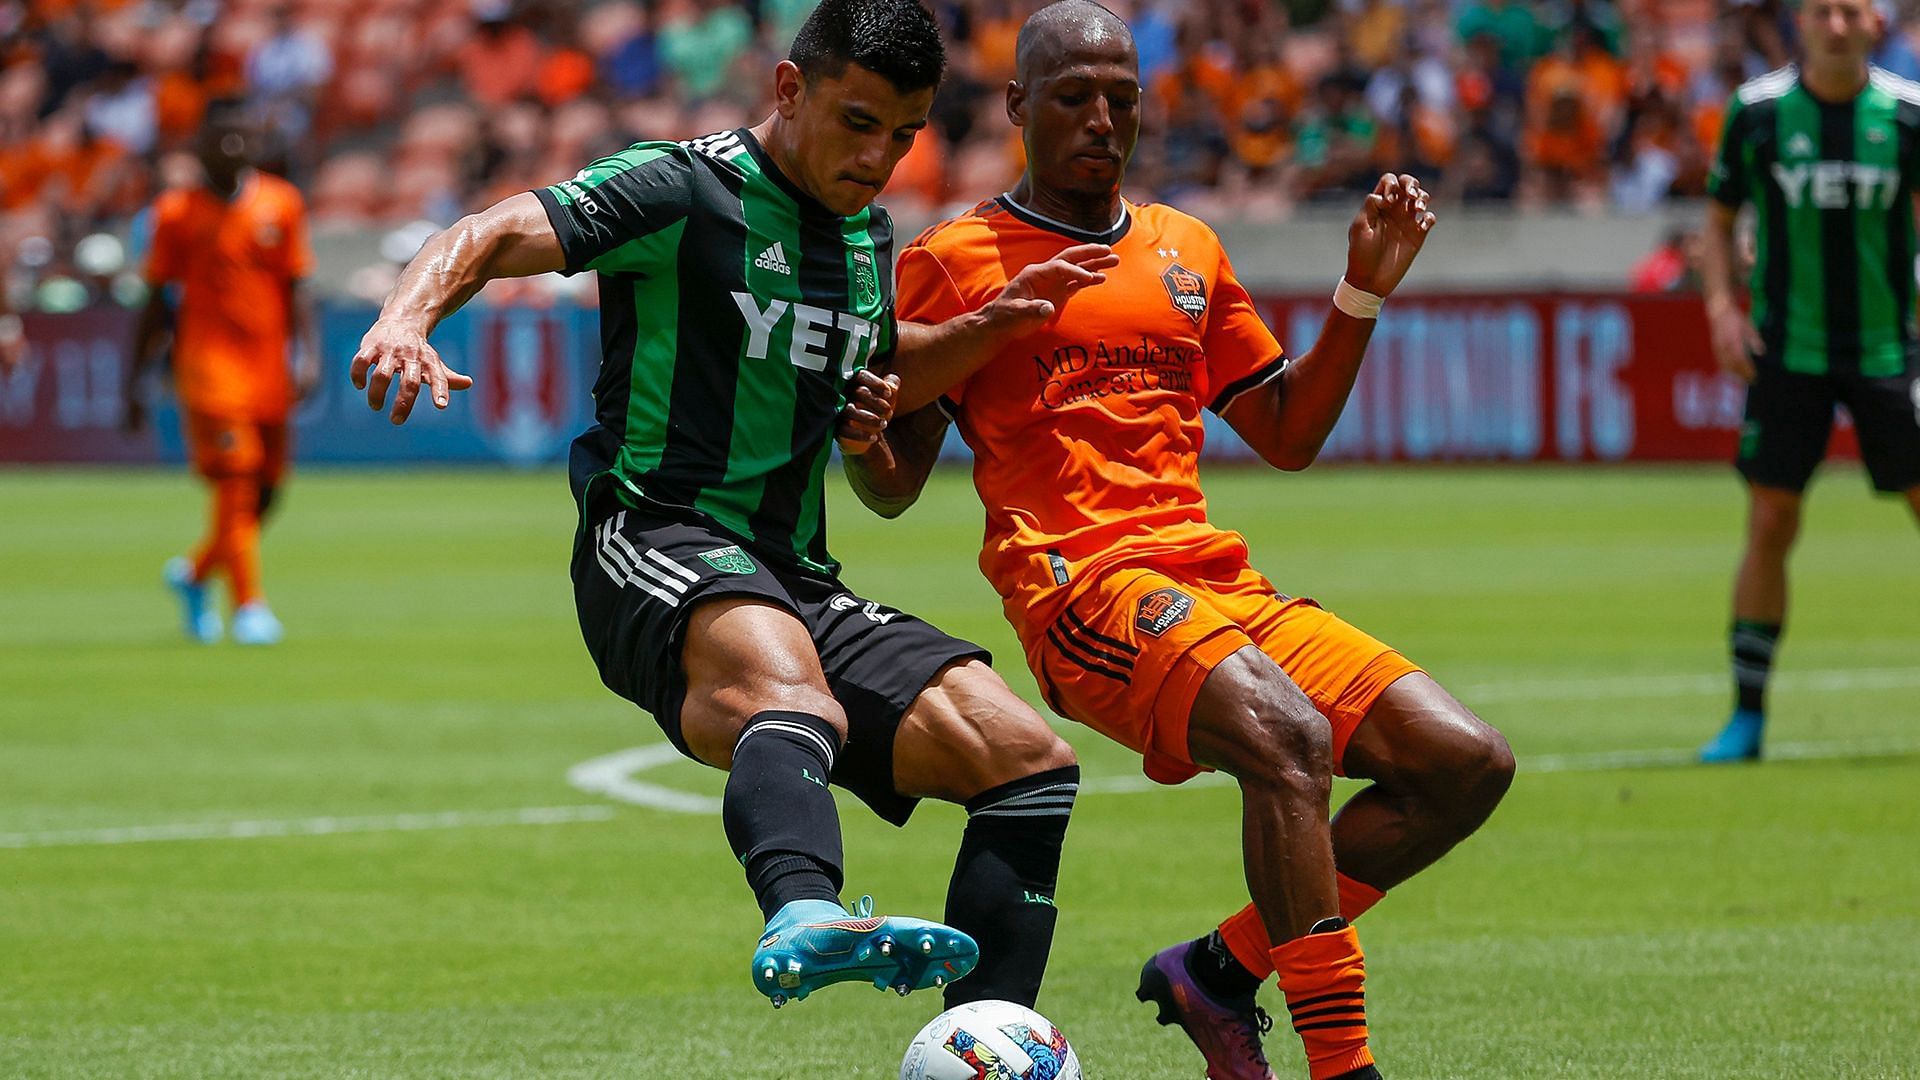 Houston Dynamo will take on local rivals Austin in the MLS on Saturday